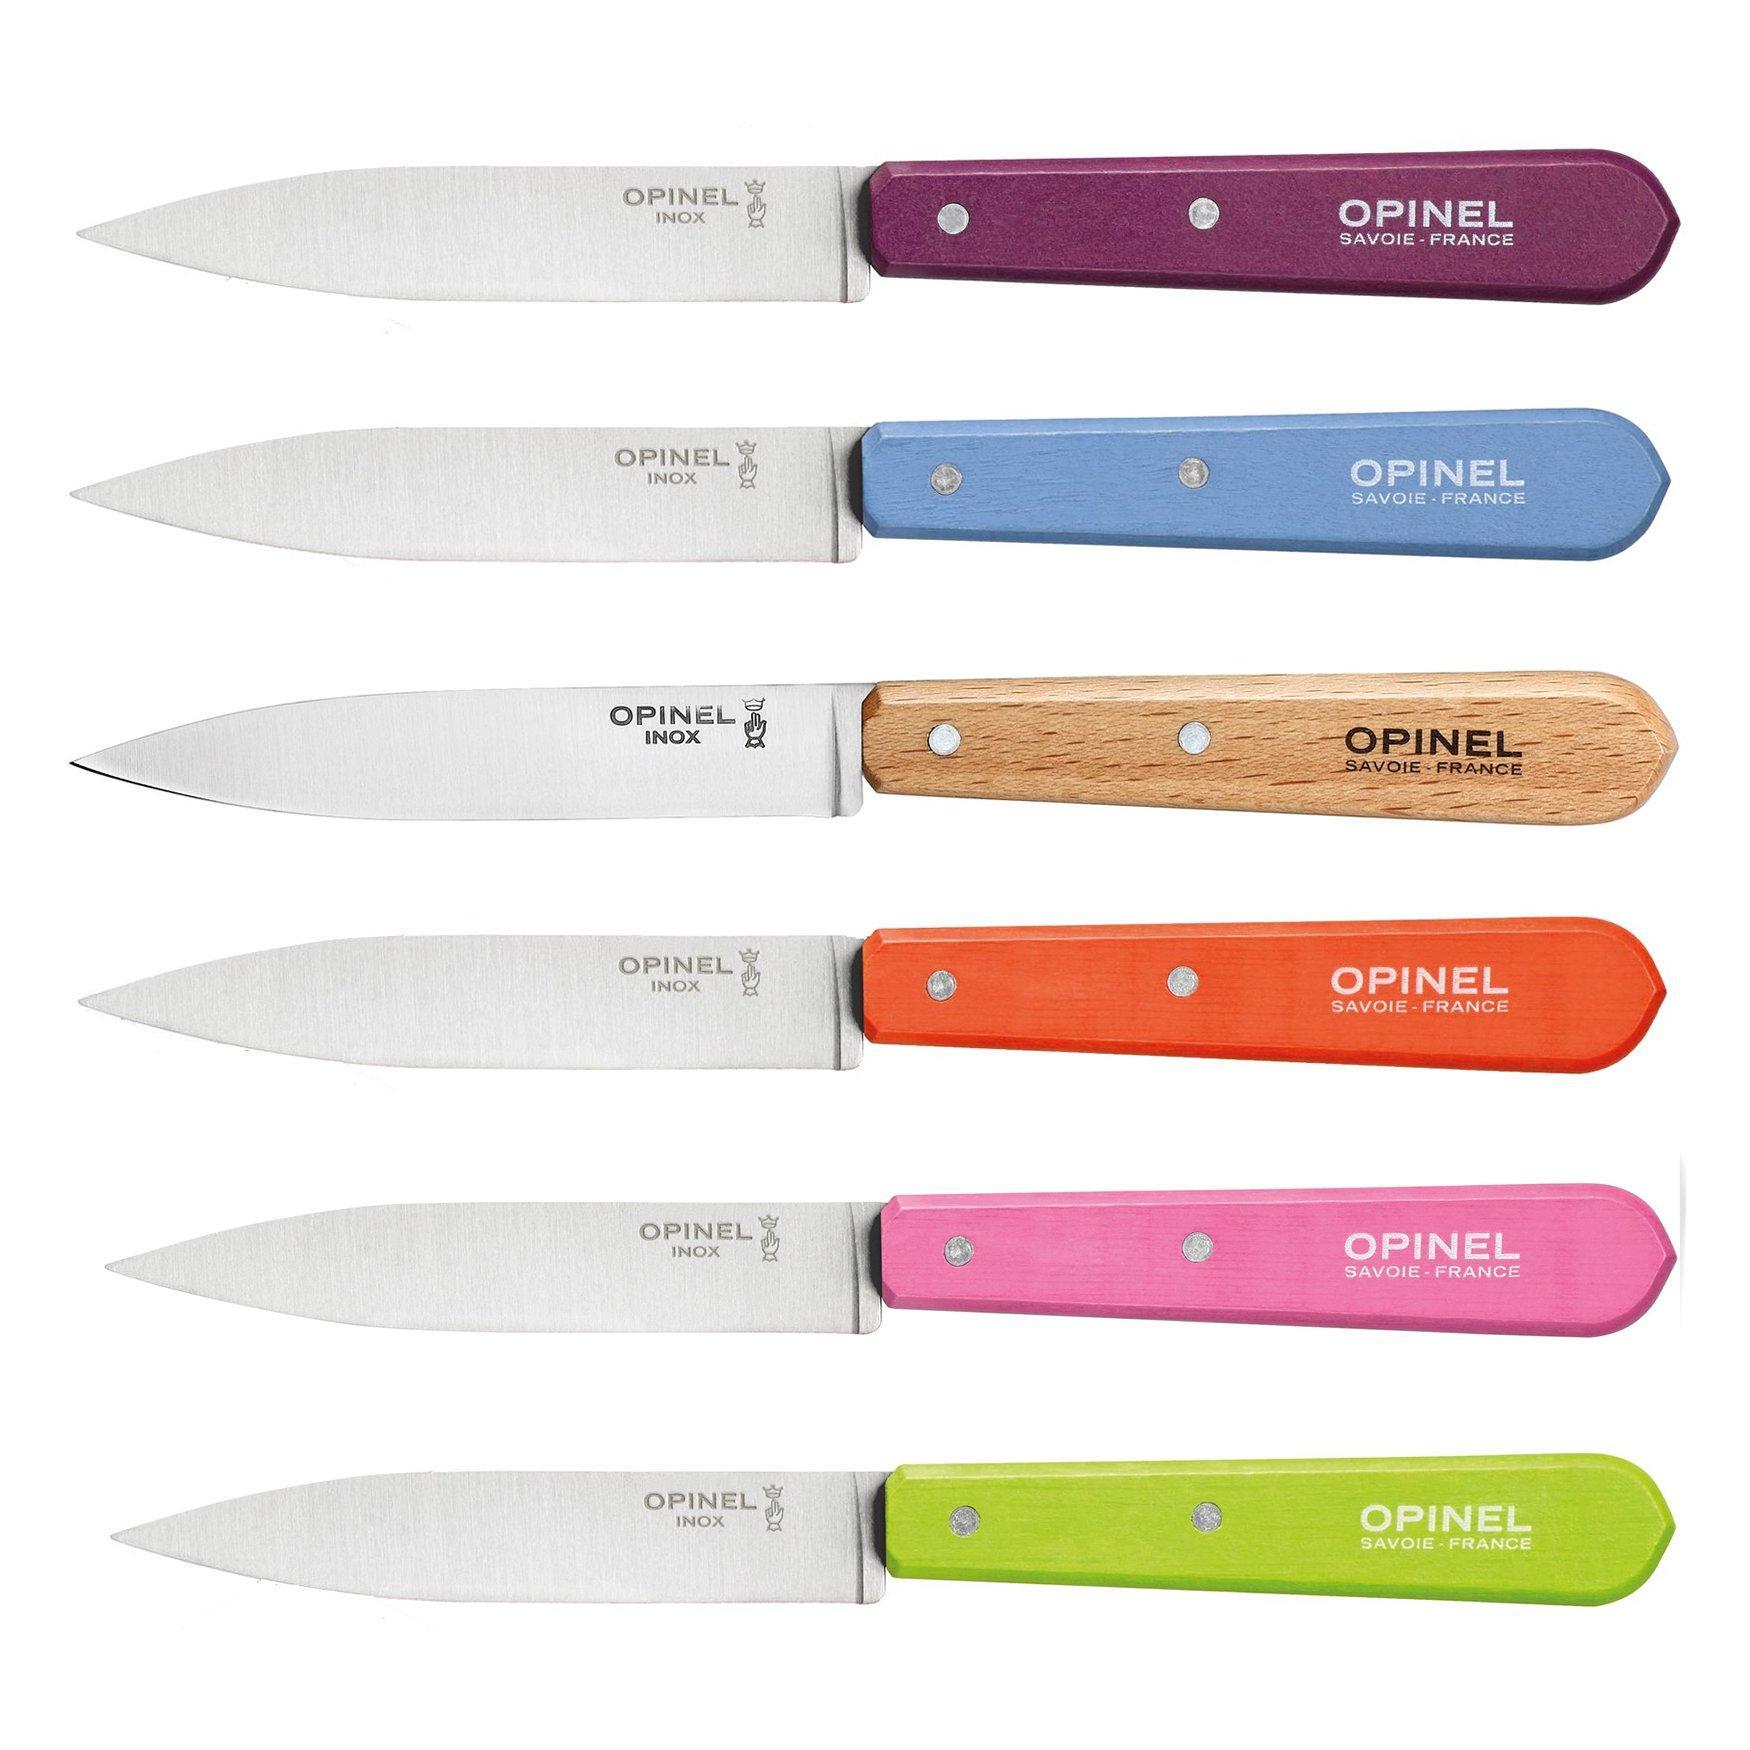 OPINEL 112 Paring knife - Essentials no 112 - slicing chopping peeling knife